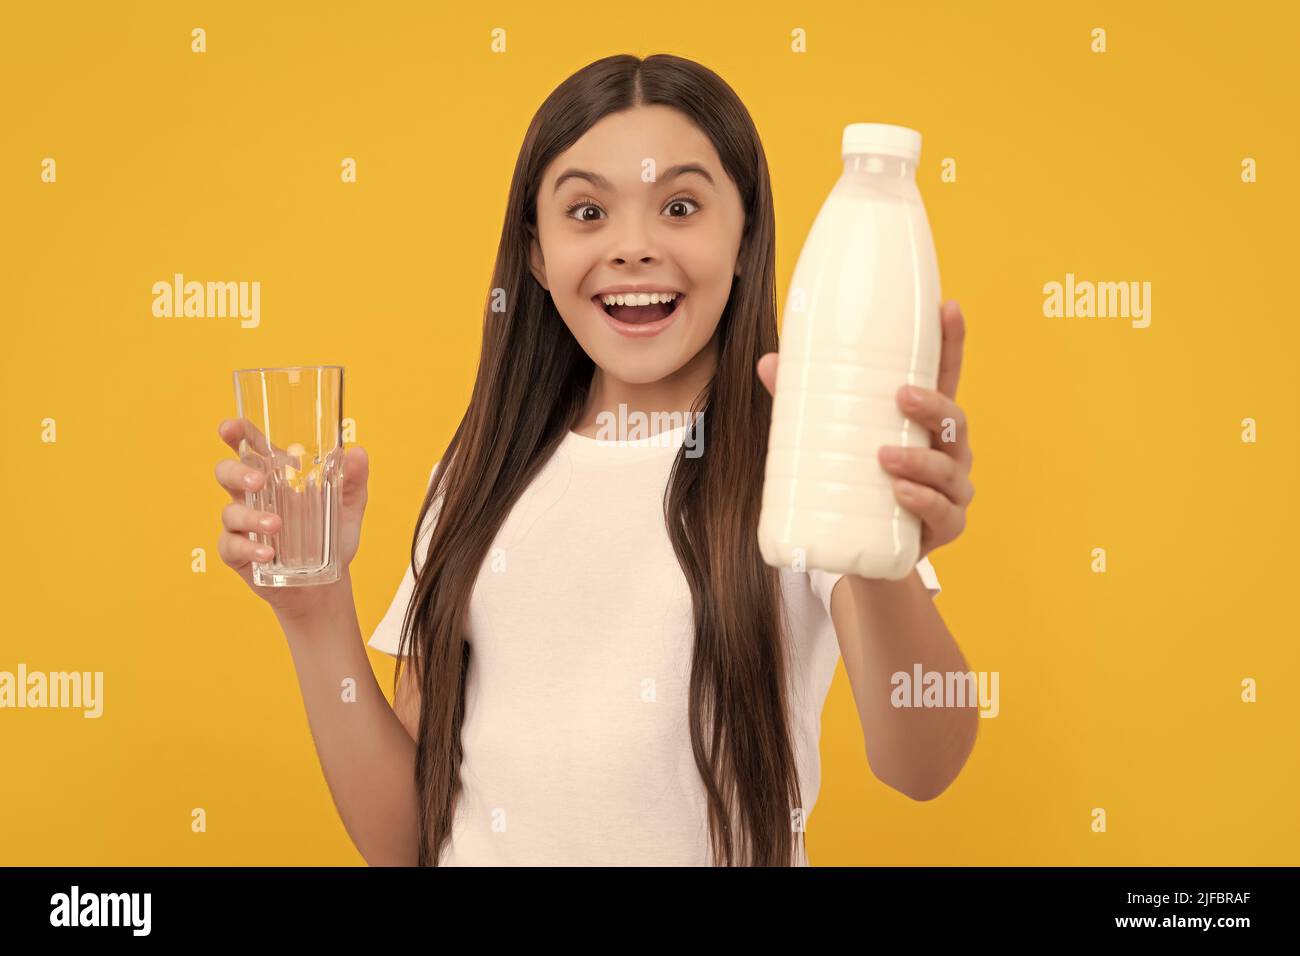 amazed child offer dairy beverage product. teen girl going to drink milk. Stock Photo